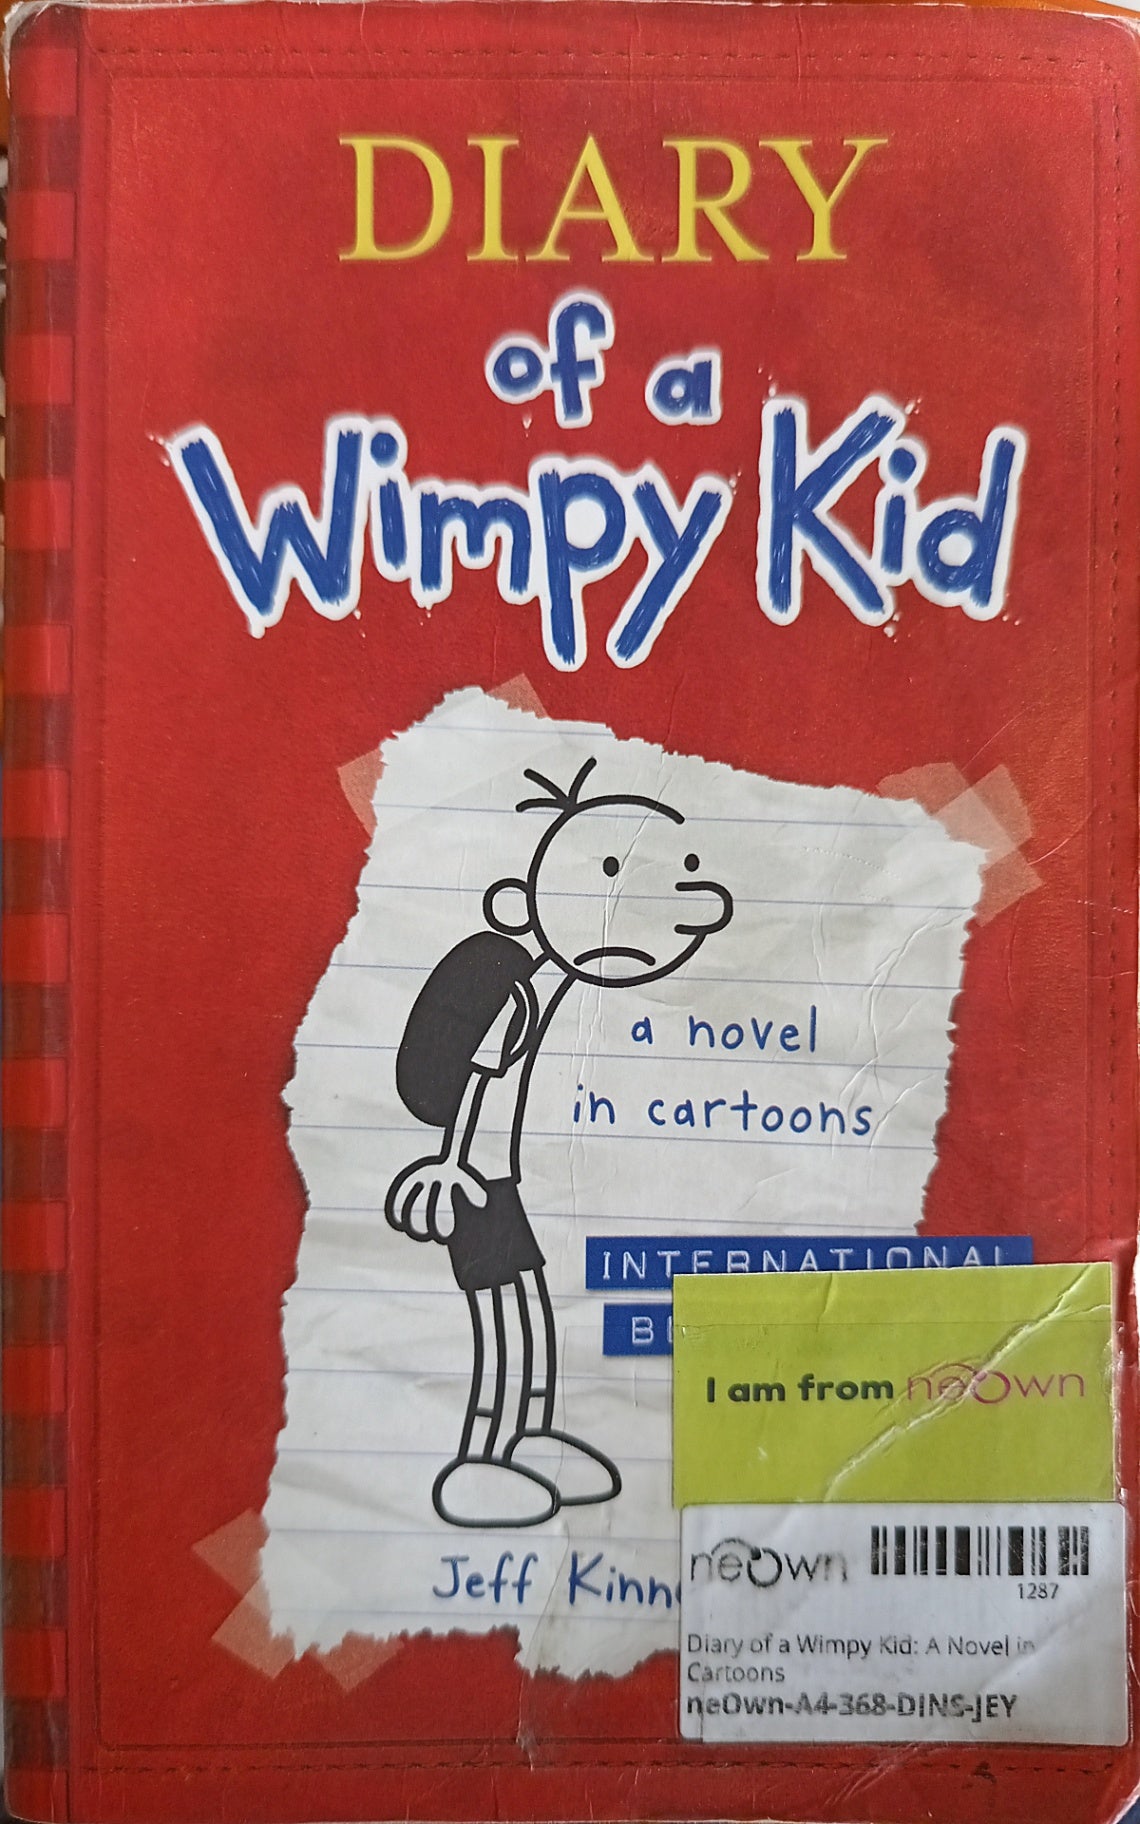 Diary of a Wimpy Kid: A Novel in Cartoons